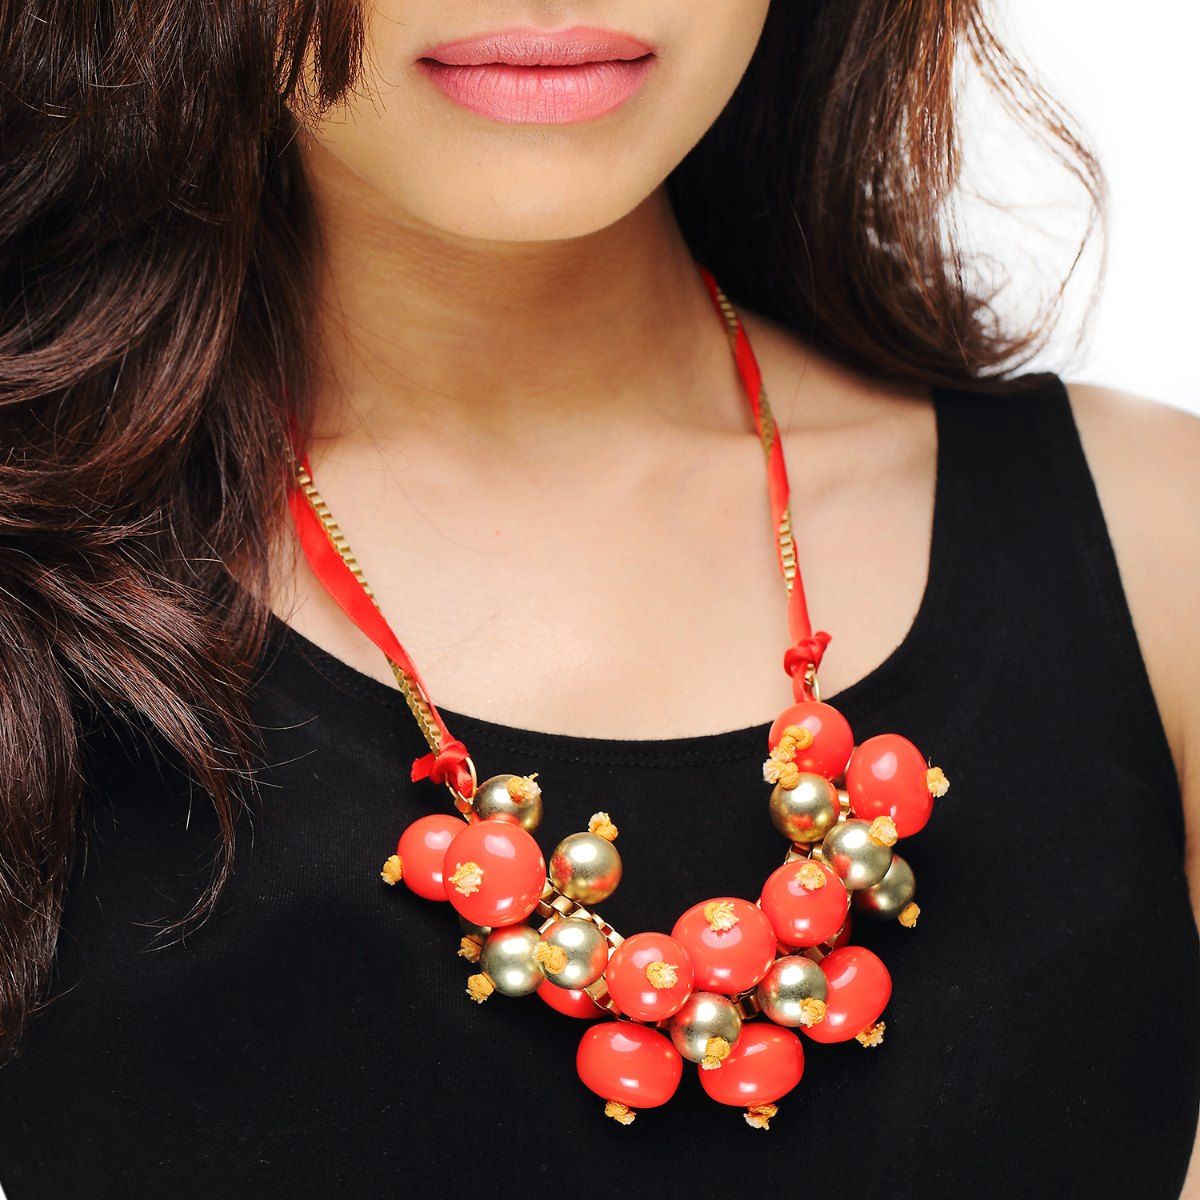 Orange Double Layer Tagua Necklace - Galapagos Tagua Jewelry